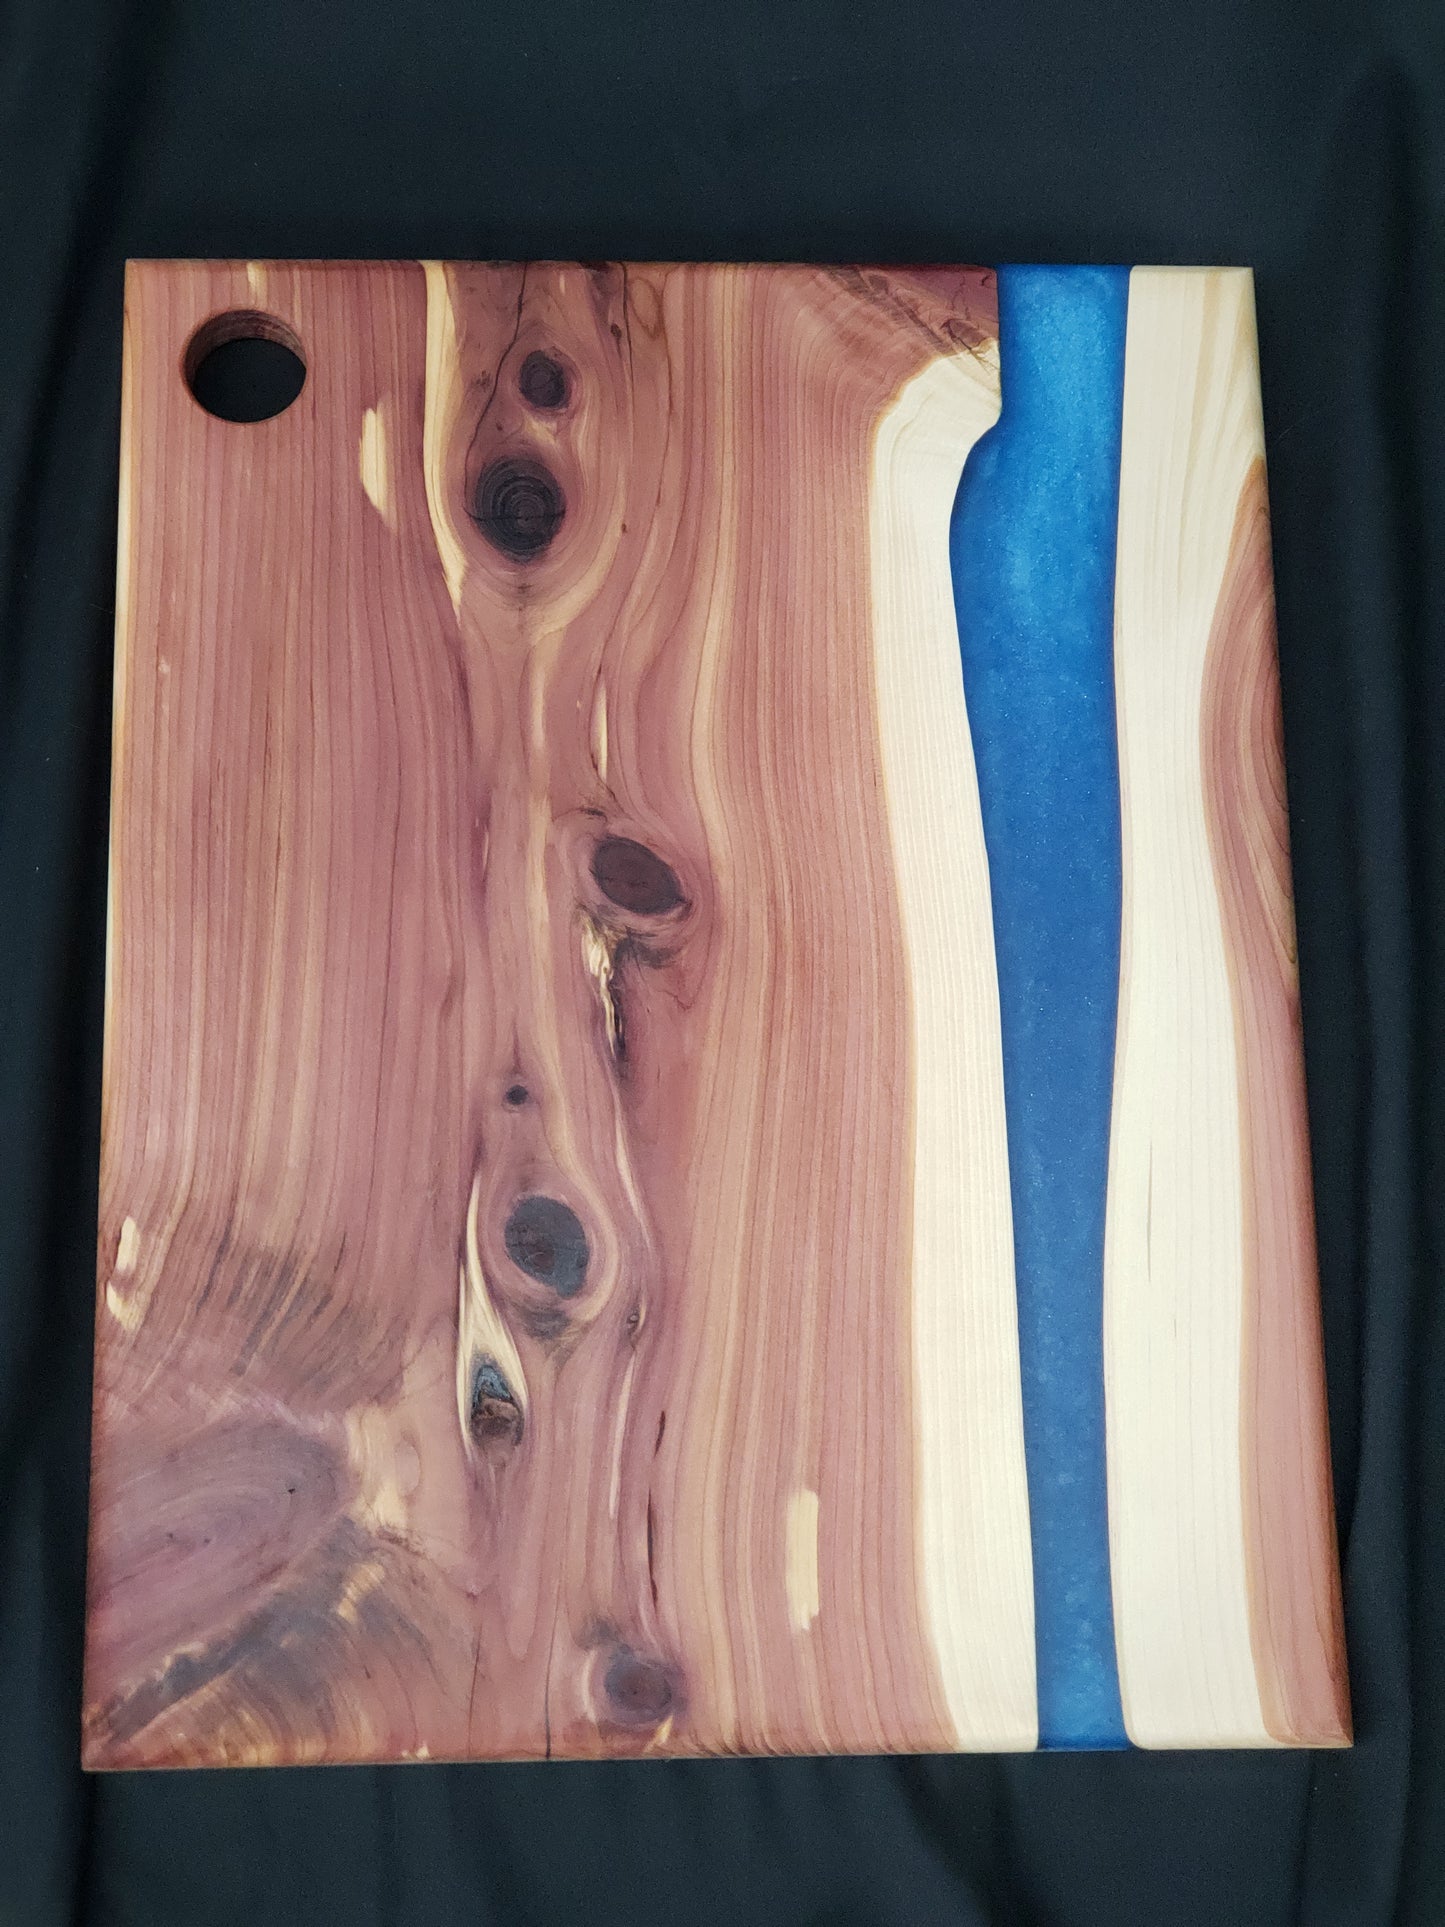 Cedar Wood and Azure Mica Epoxy Charcuterie Board With Juice Groove